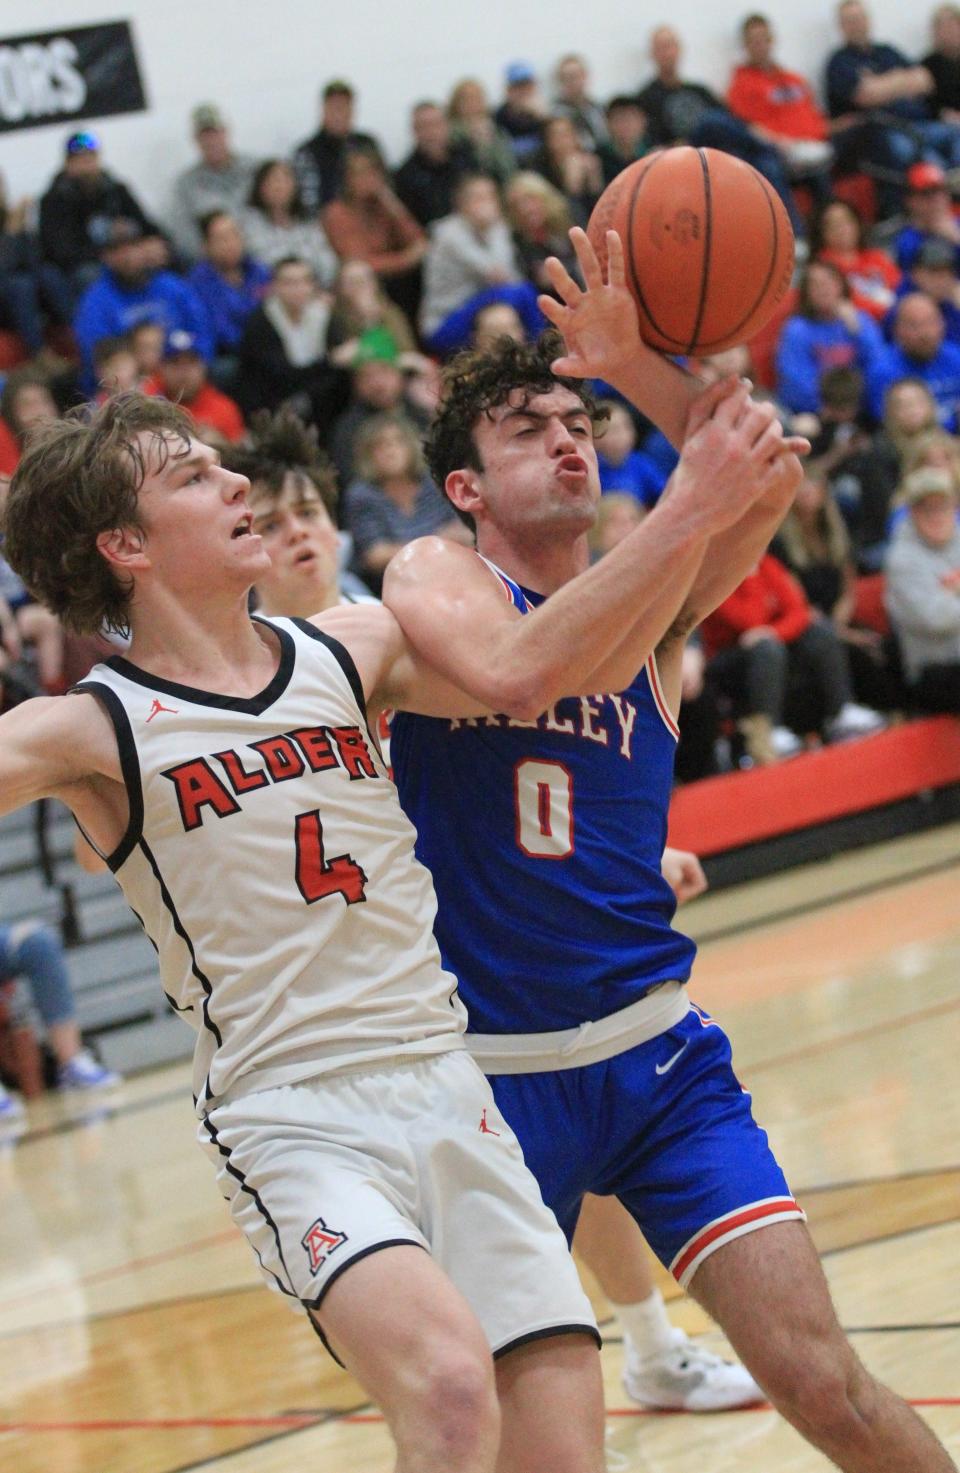 Peyton Heiss, left, scored 31 points on Saturday to lead Jonathan Alder to its first district title since 1979.